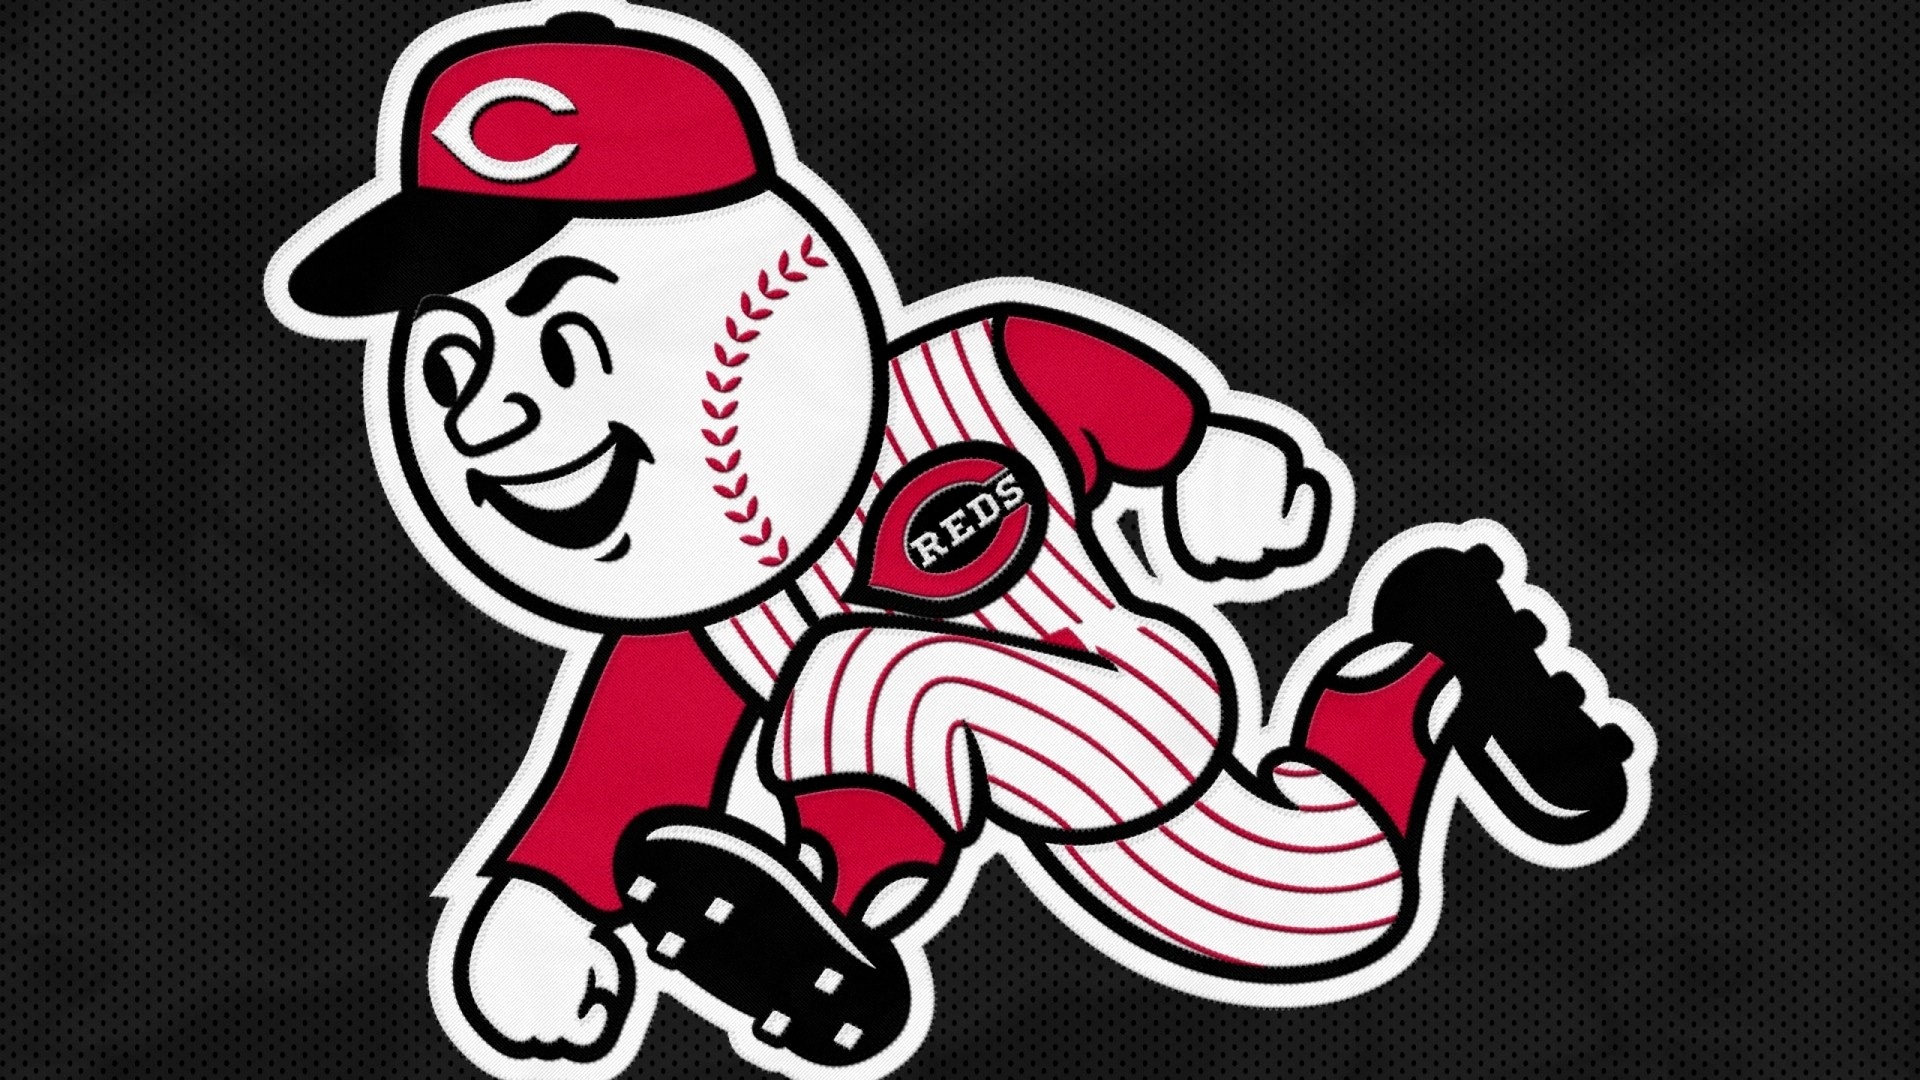 HD Desktop Wallpaper Cincinnati Reds MLB with high-resolution 1920x1080 pixel. You can use this wallpaper for Mac Desktop Wallpaper, Laptop Screensavers, Android Wallpapers, Tablet or iPhone Home Screen and another mobile phone device